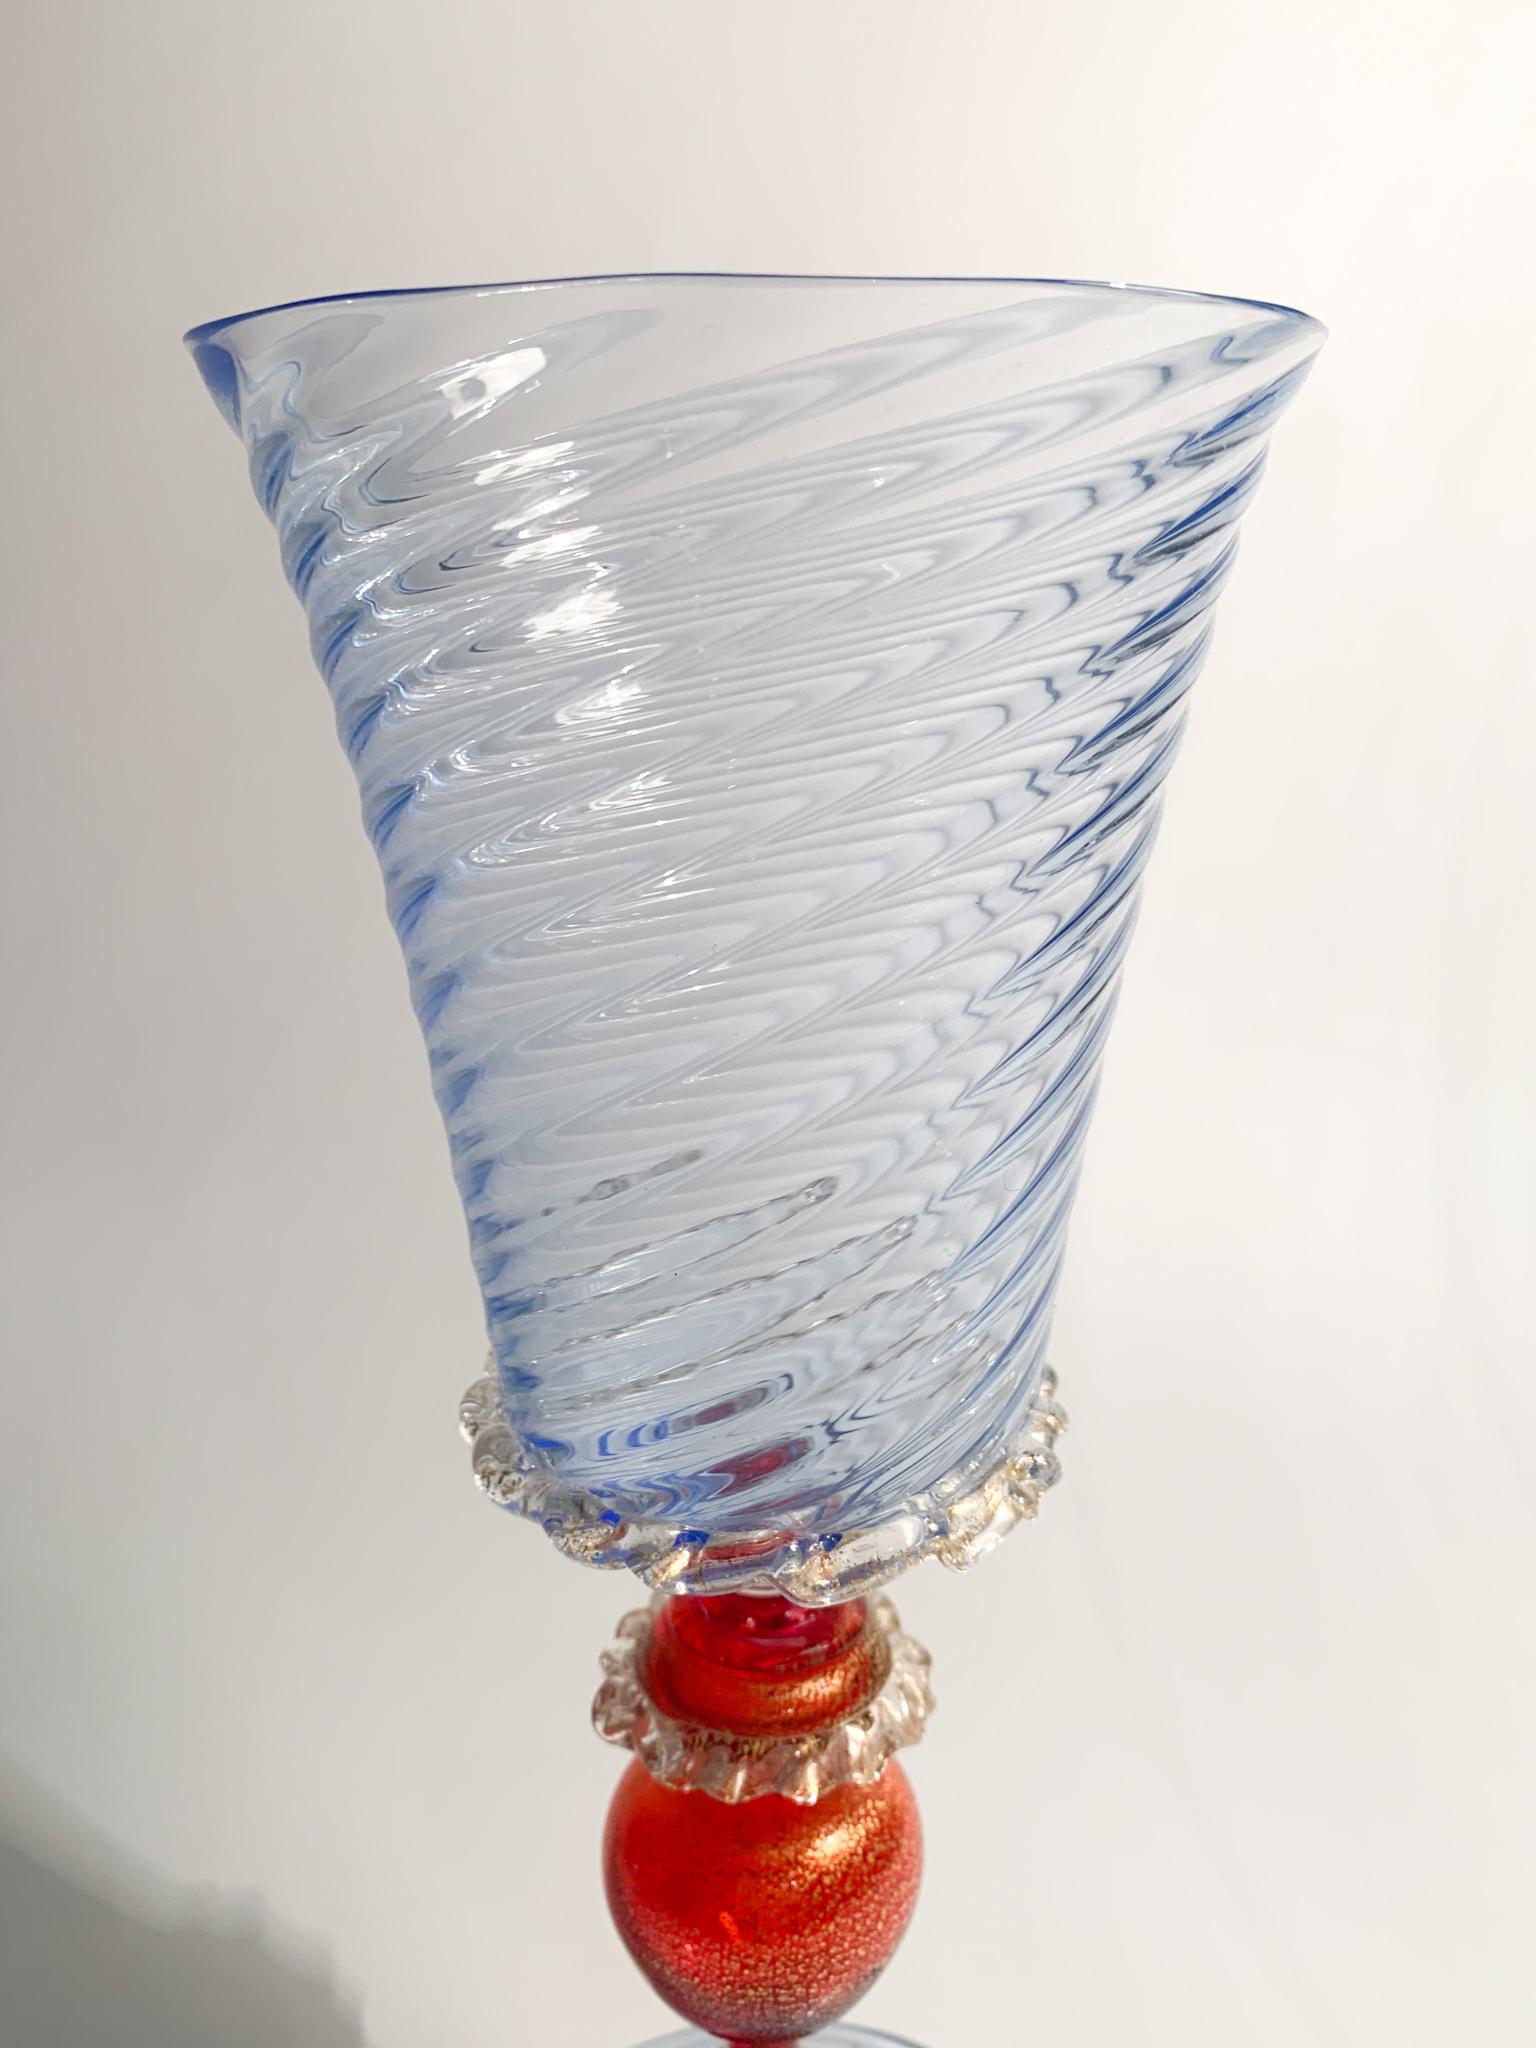 Italian Collector's Glass in Blue and Red Murano Glass from the 1950s For Sale